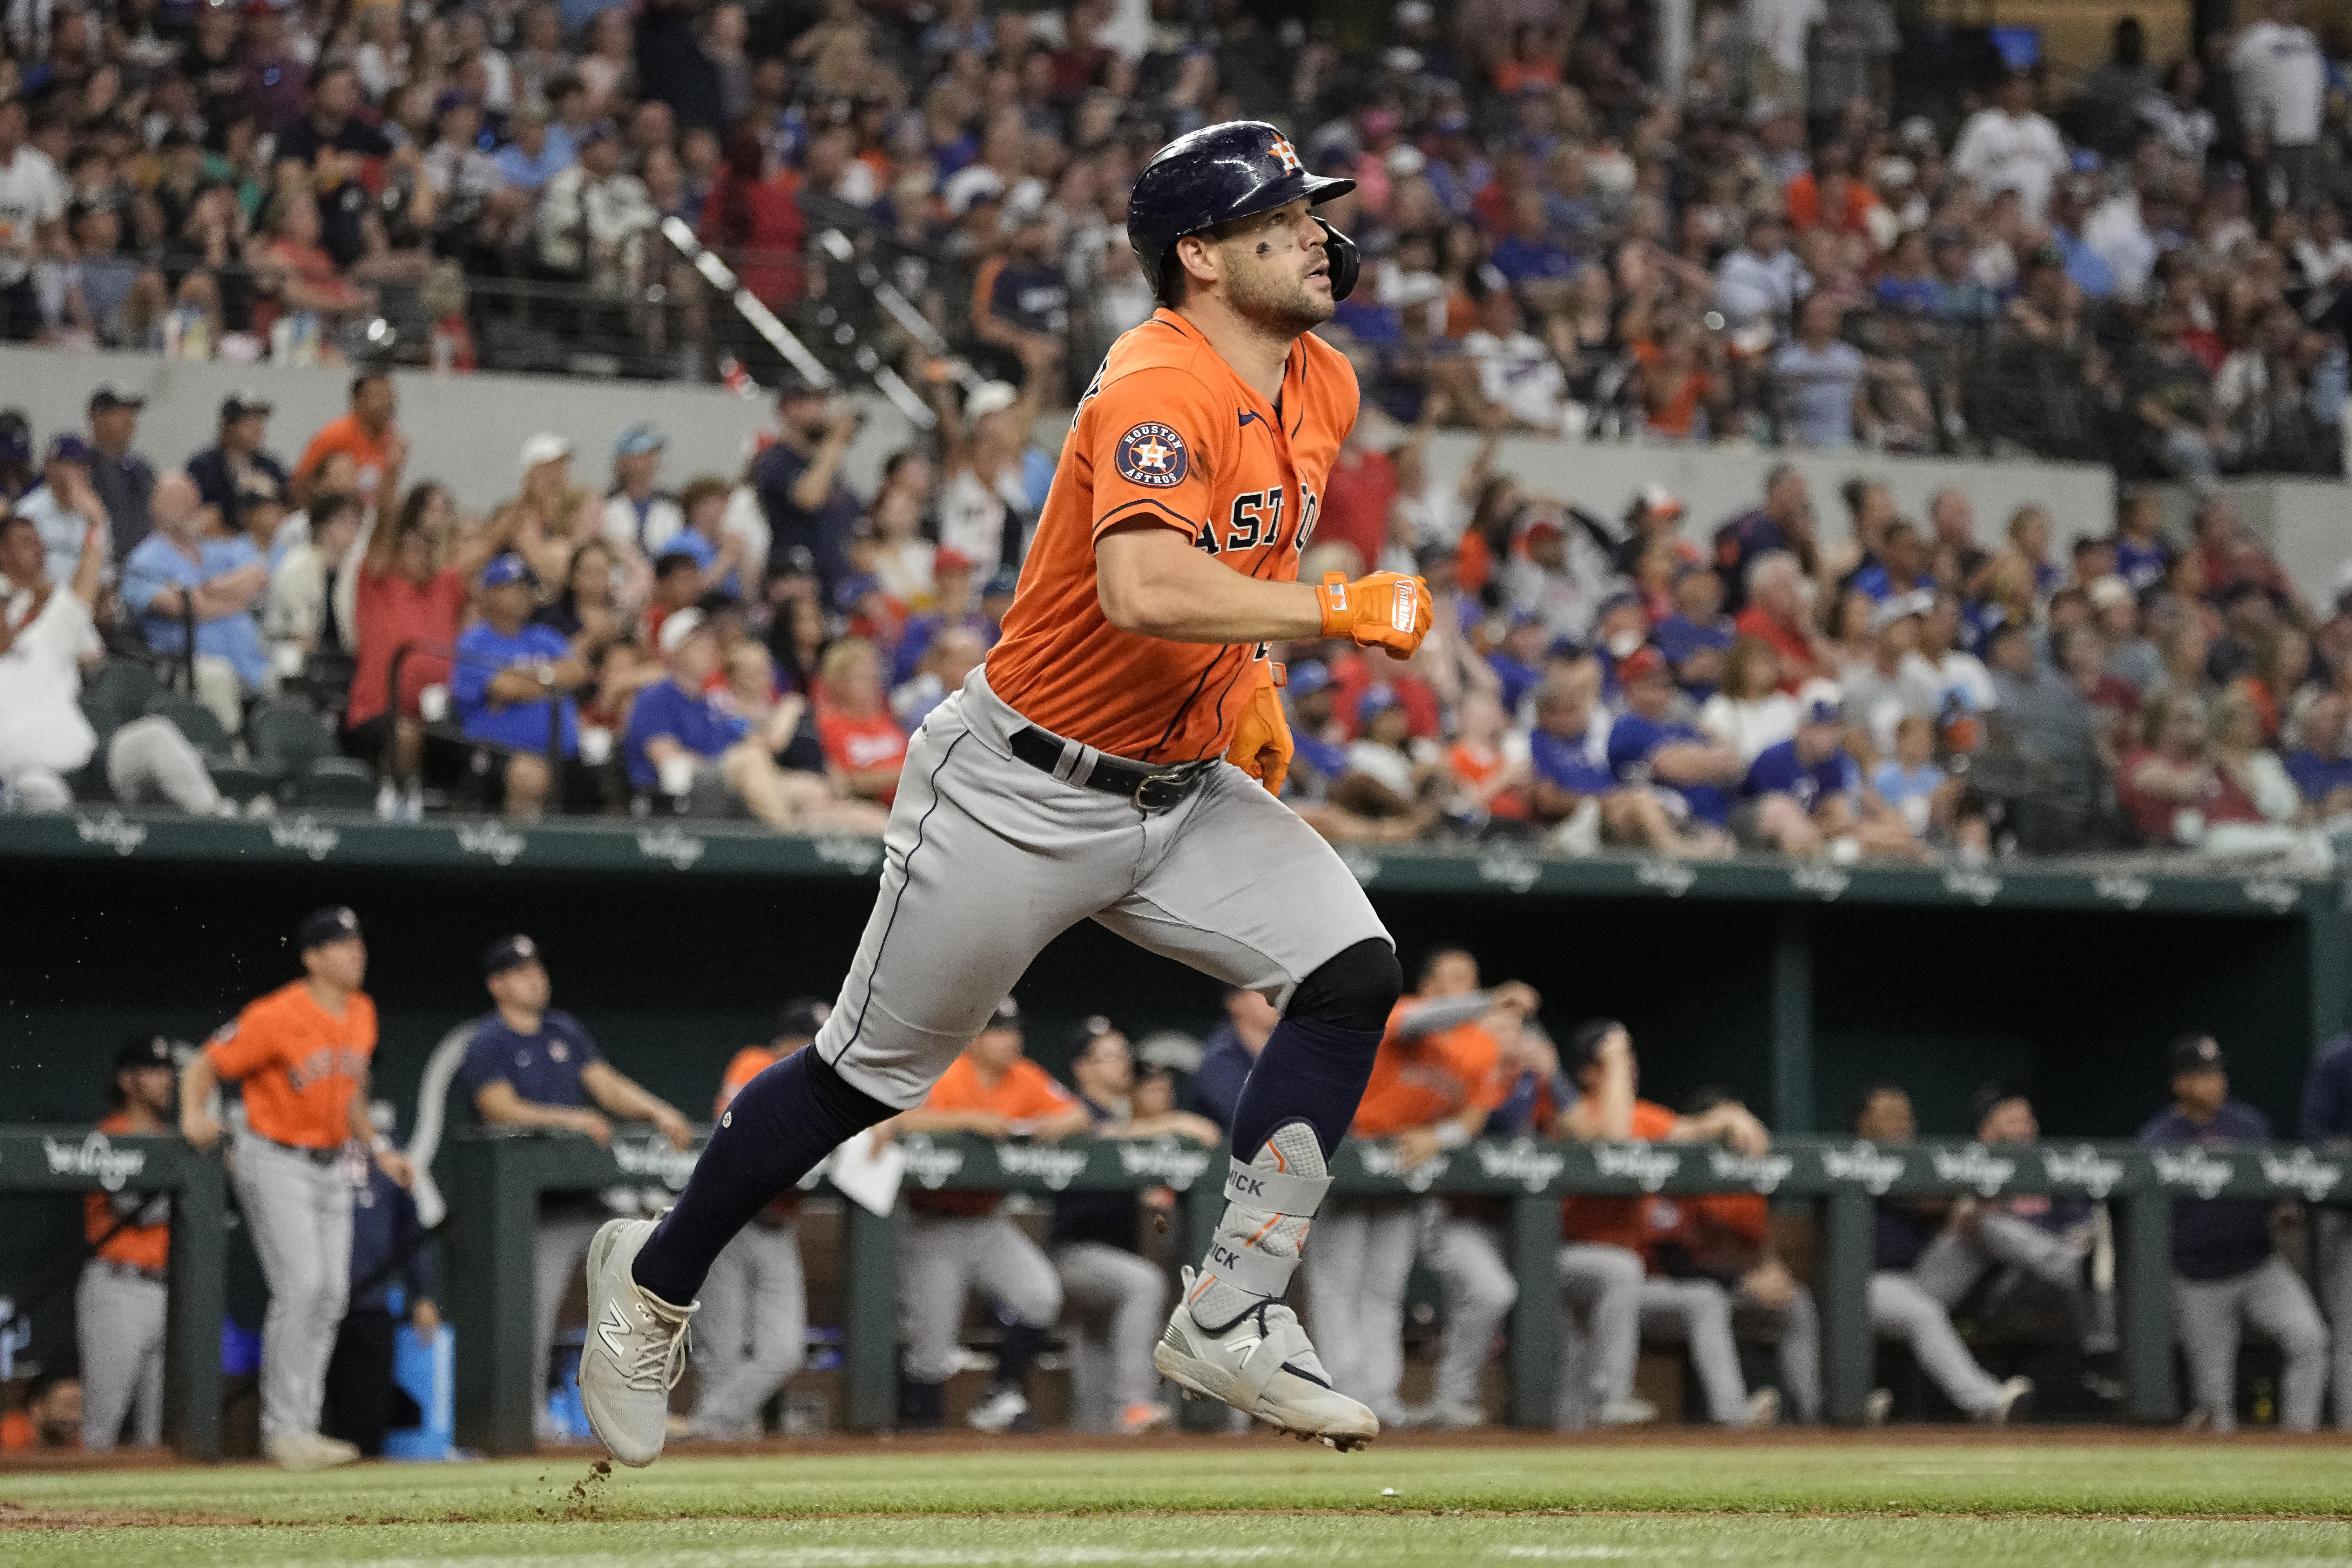 McCormick's bases-clearing triple lifts the Astros over the